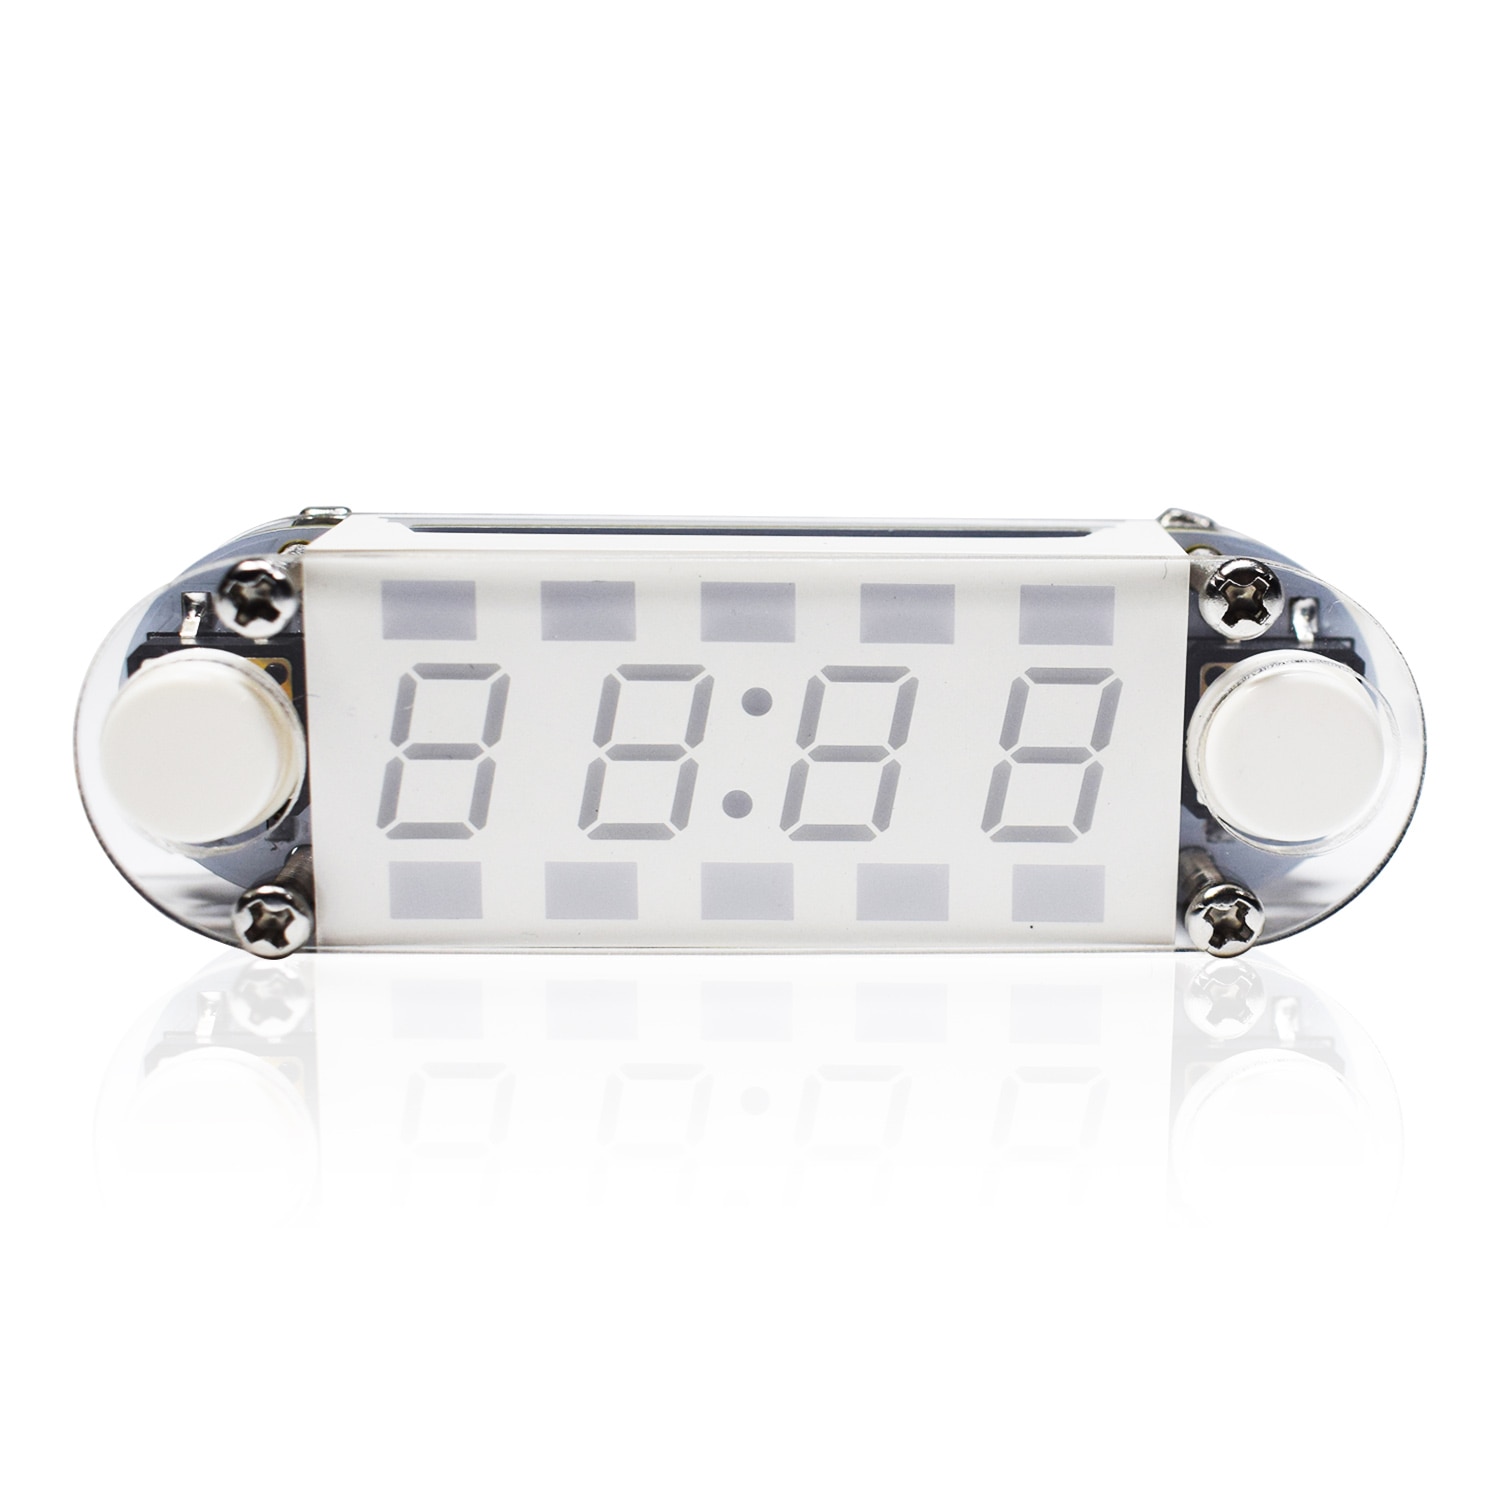 4-Digit Digital Clock DIY Kit LED Mixed Color Nixie Tube Table Desk USB-Powered Clock with Countdown Timer Stopwatch Alarm Light